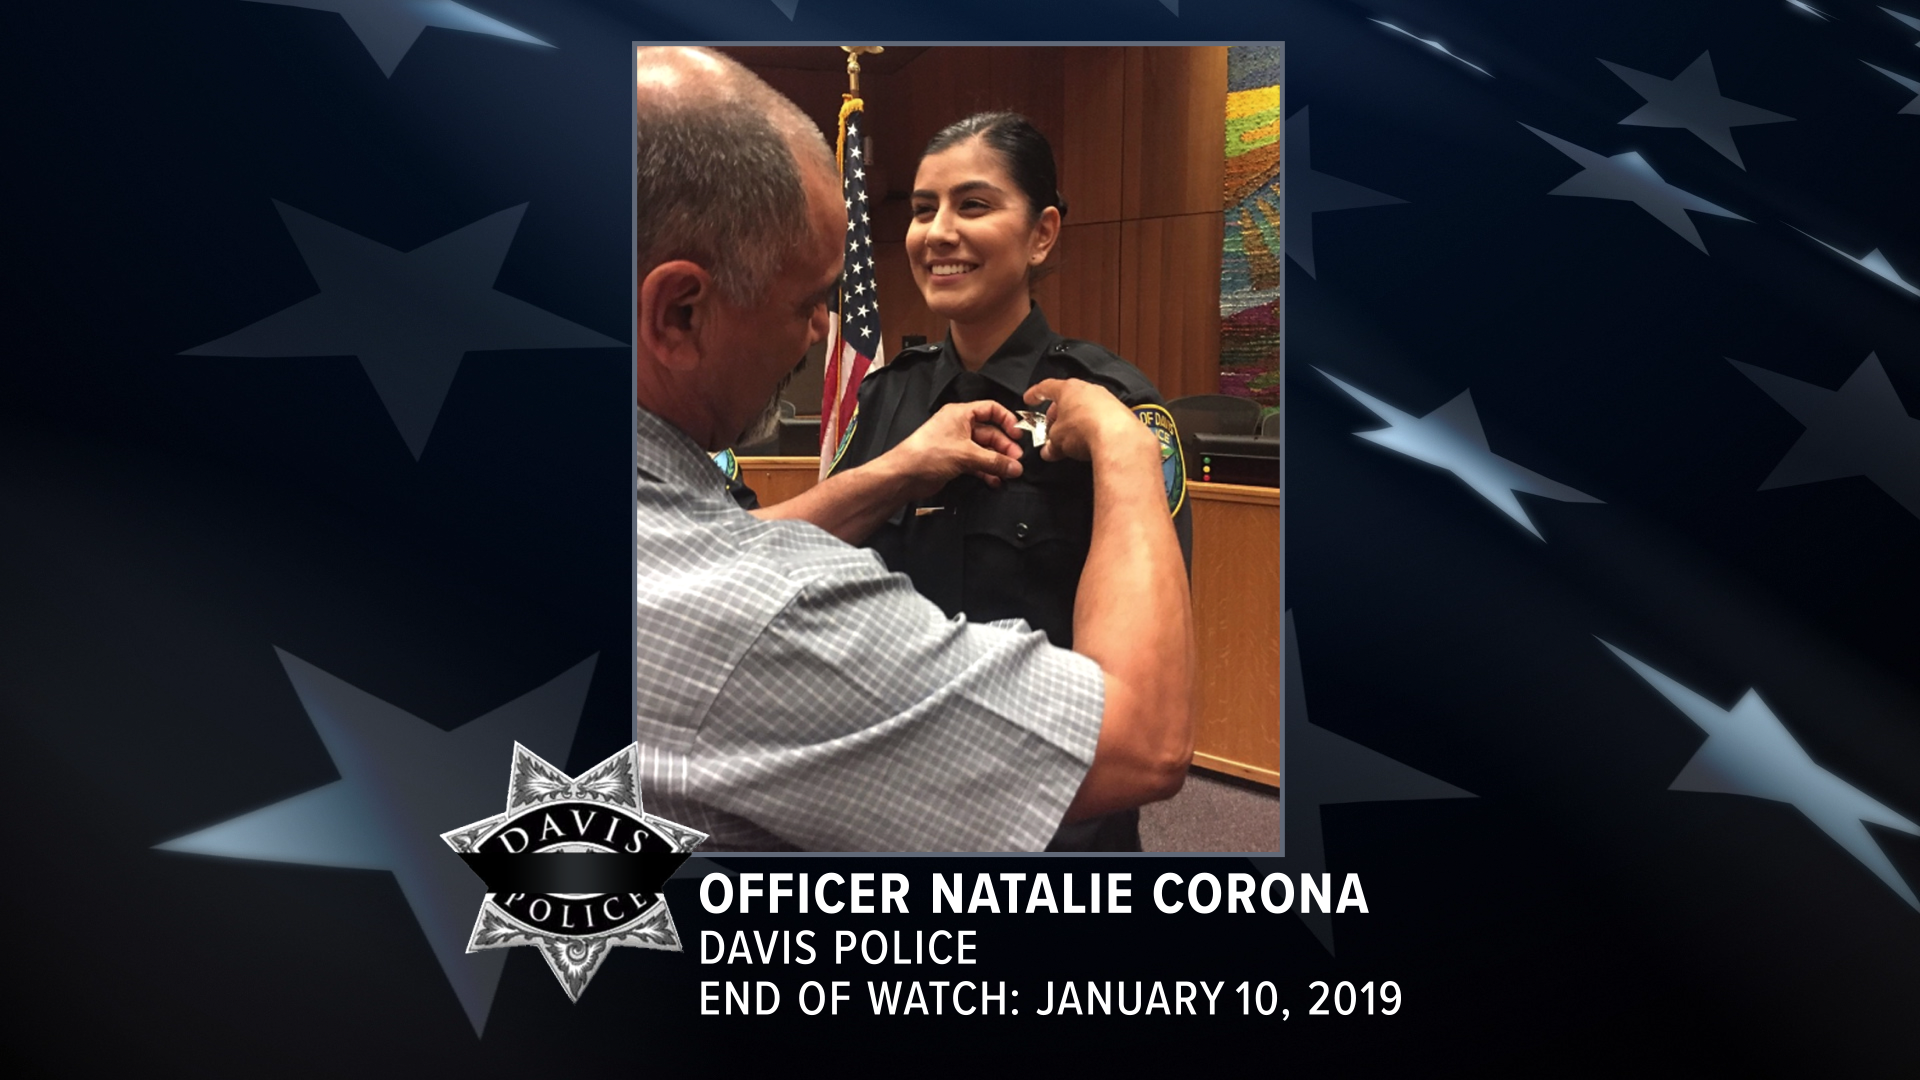 Central Park is in the heart of Davis. It's well-known for the farmers market, for events, for a random evening walks and soon it may be renamed after fallen police officer Natalie Corona.